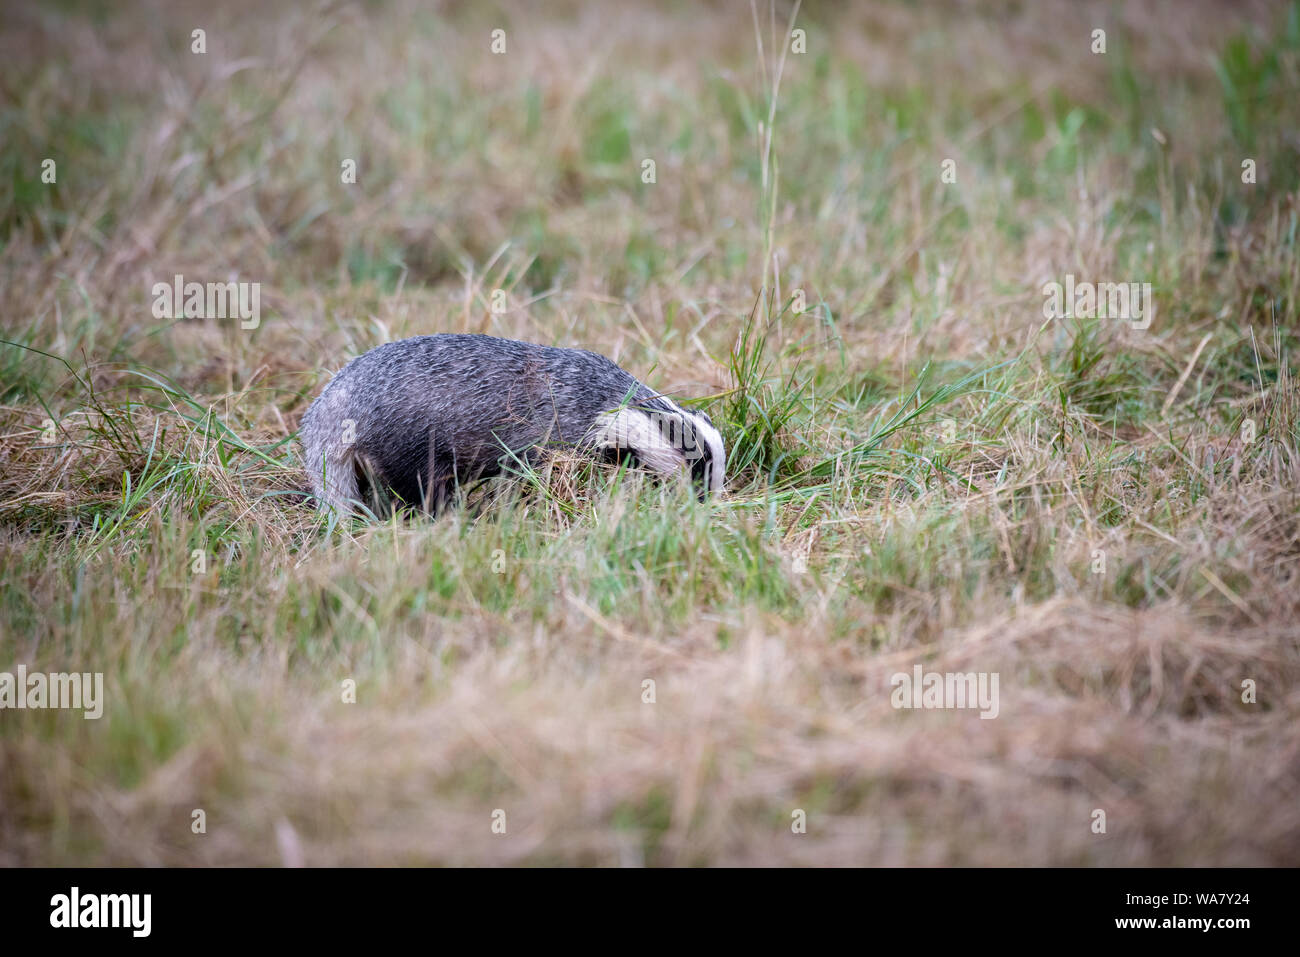 The European badger (Meles meles) or Eurasian badger, is species in the family Mustelidae native to Europe and some parts of Western Asia. Wildlife Stock Photo